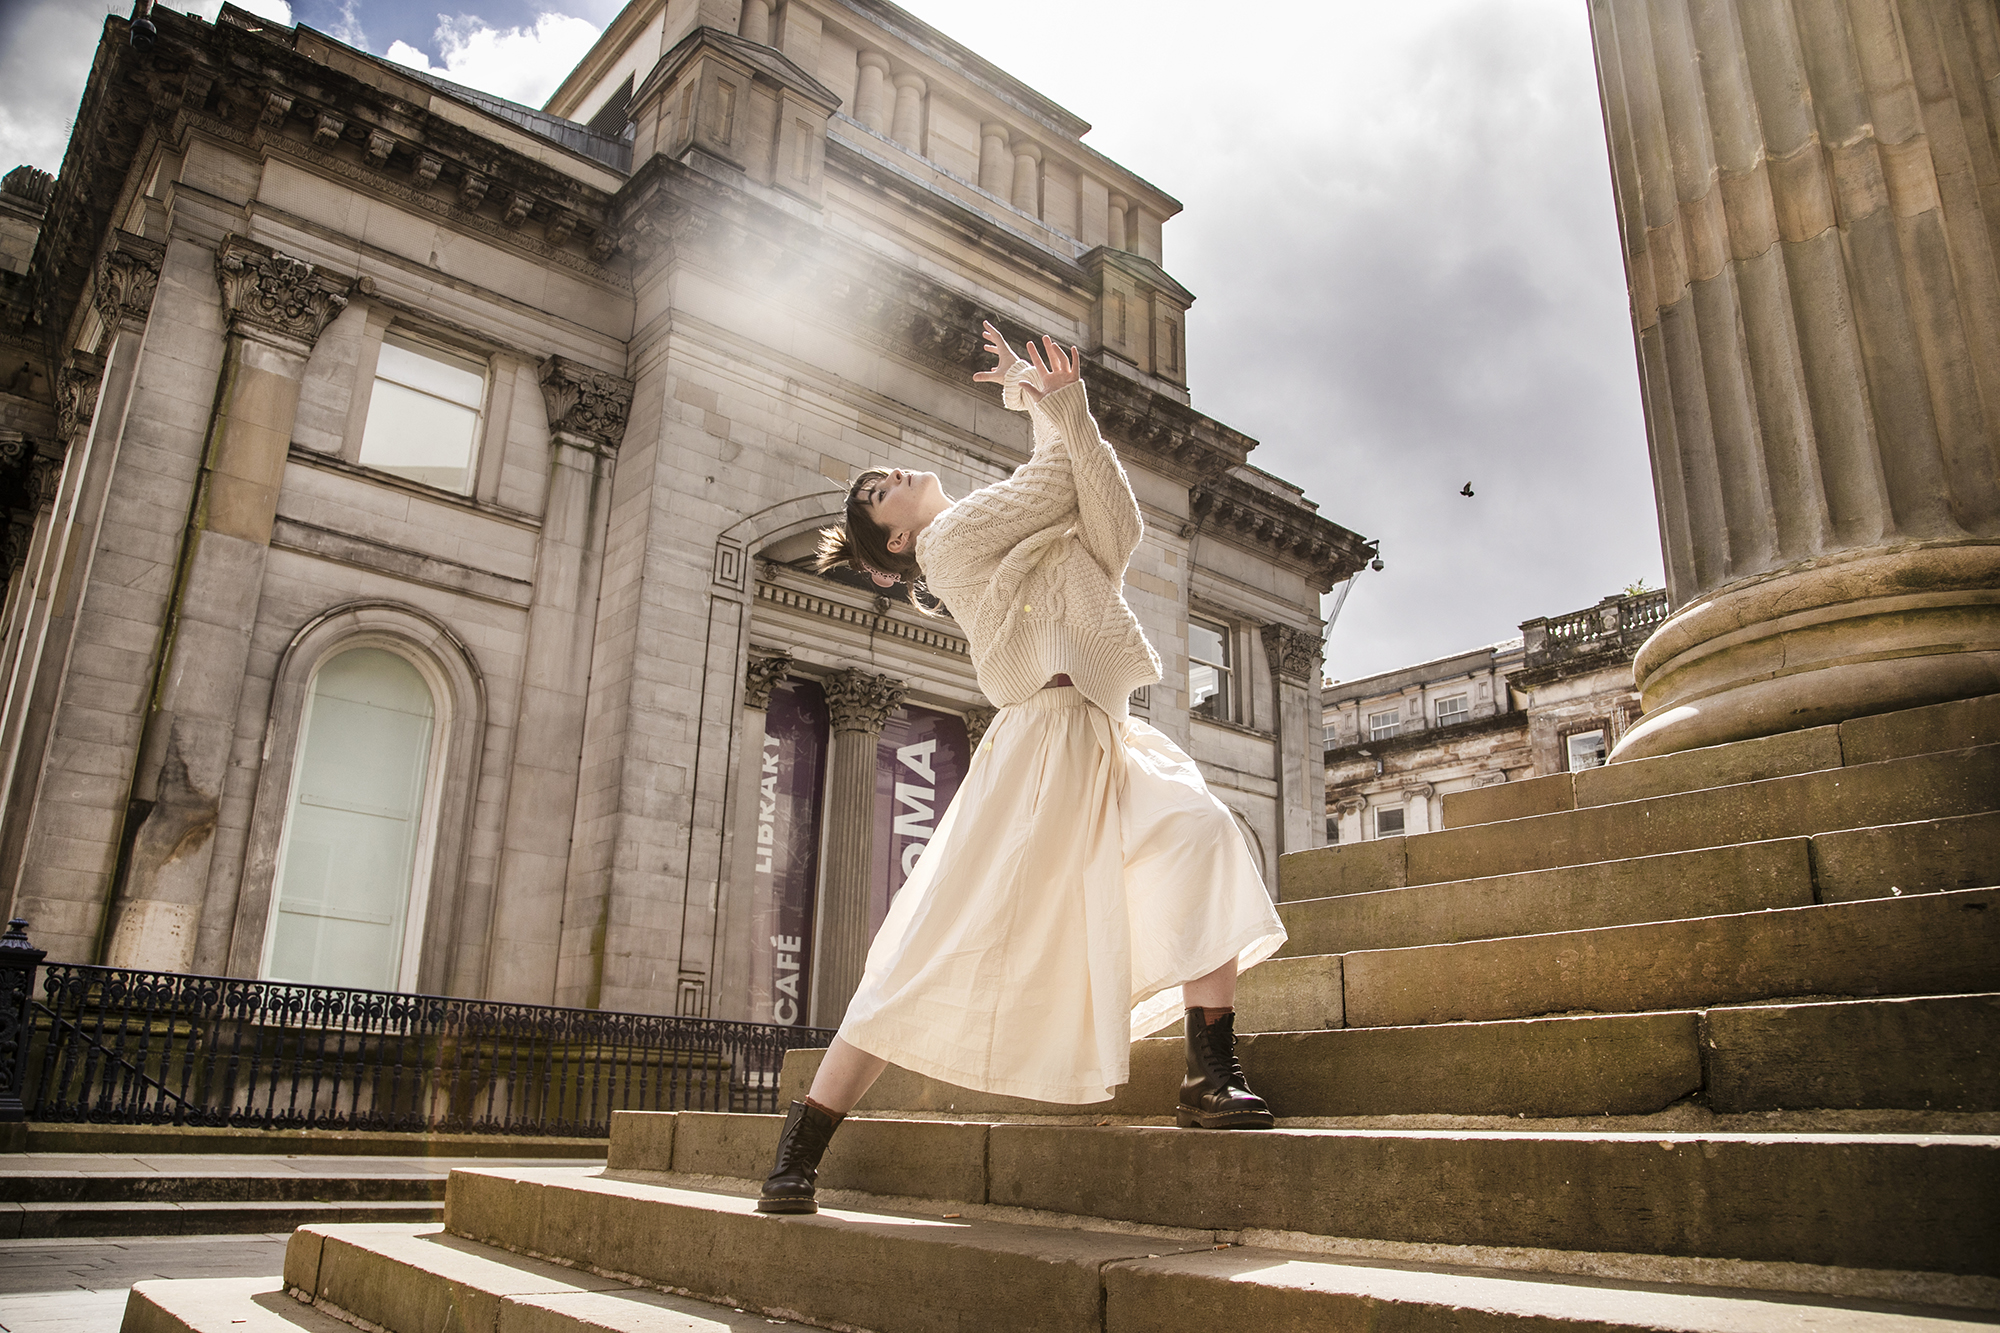 dancer lunging on steps of Glasgow council building with large pillars. White female dancer with brown hair arms interlinked towards the sky. White cable knit jumper and white midi skirt. 